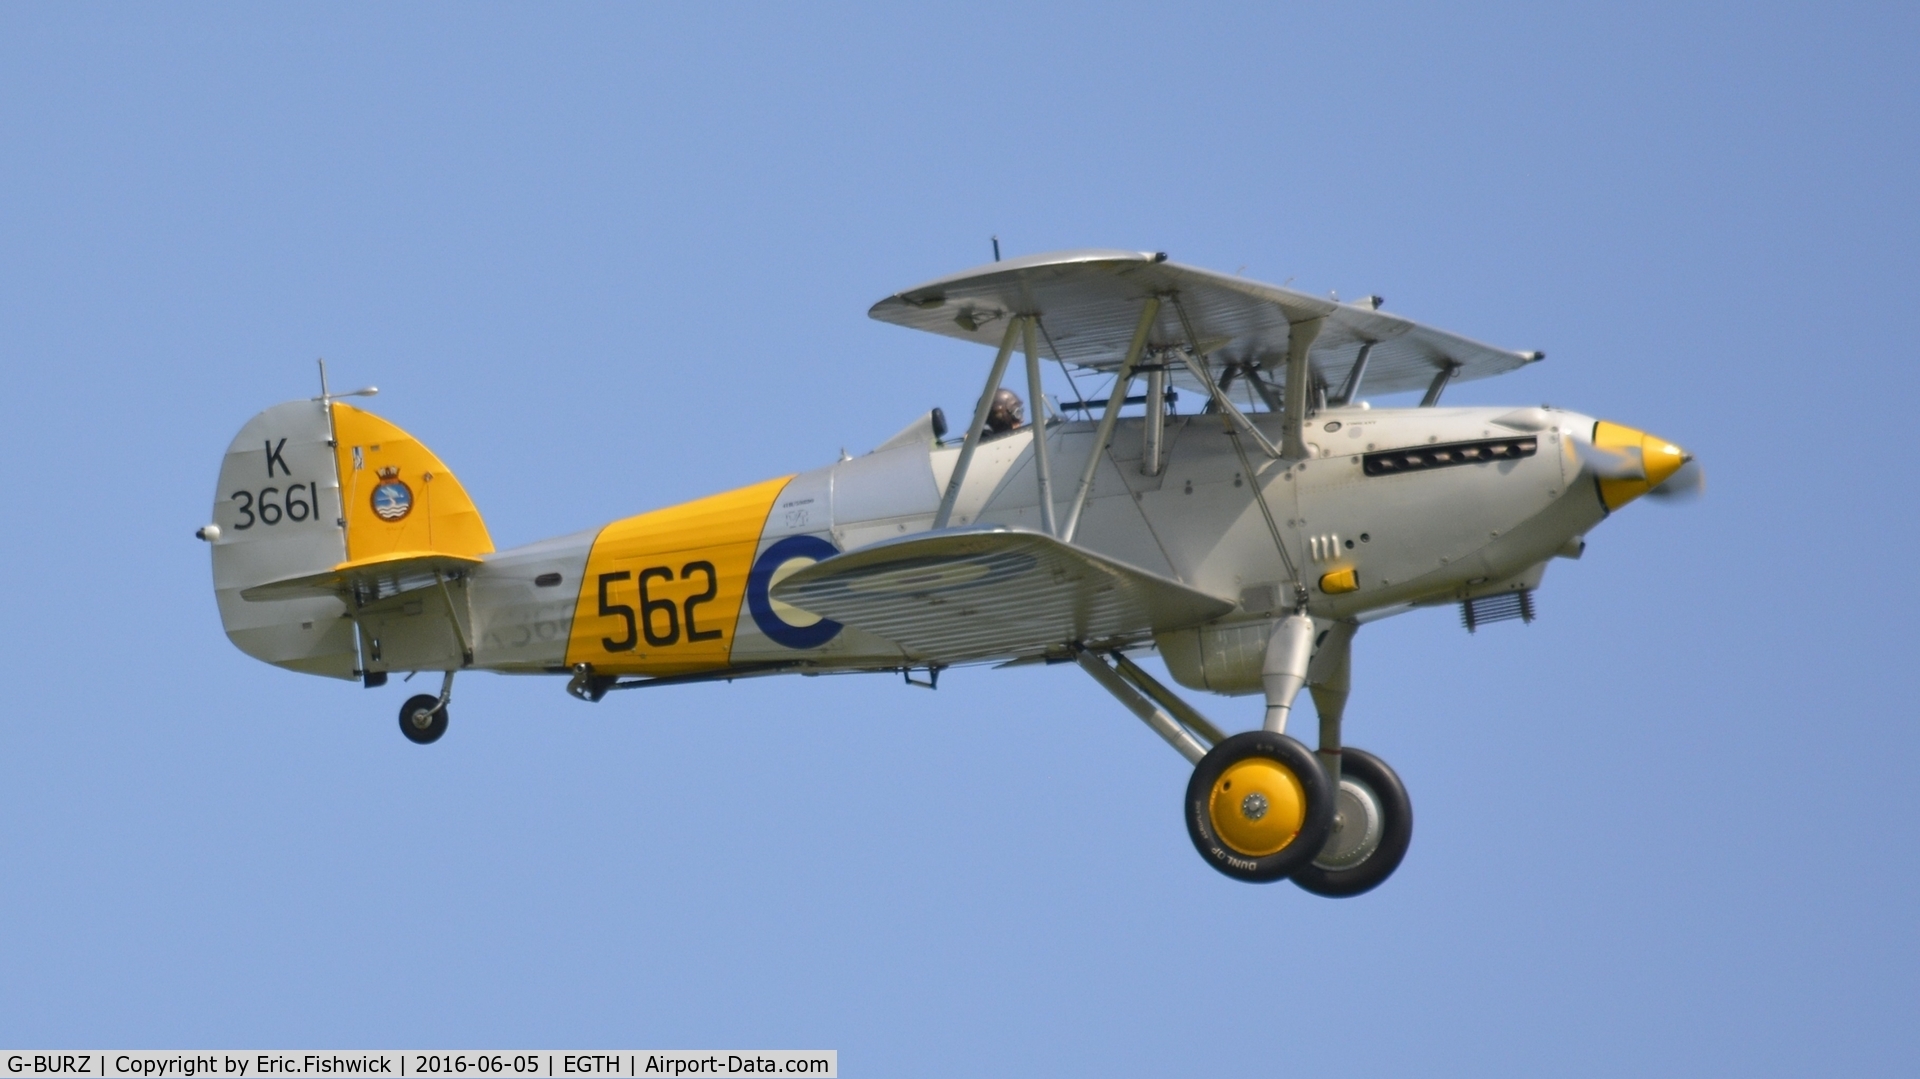 G-BURZ, 1934 Hawker Nimrod II C/N 41H-59890, 42. K3661 in display mode at Shuttleworth Collection's 'Fly Navy,' June 2016